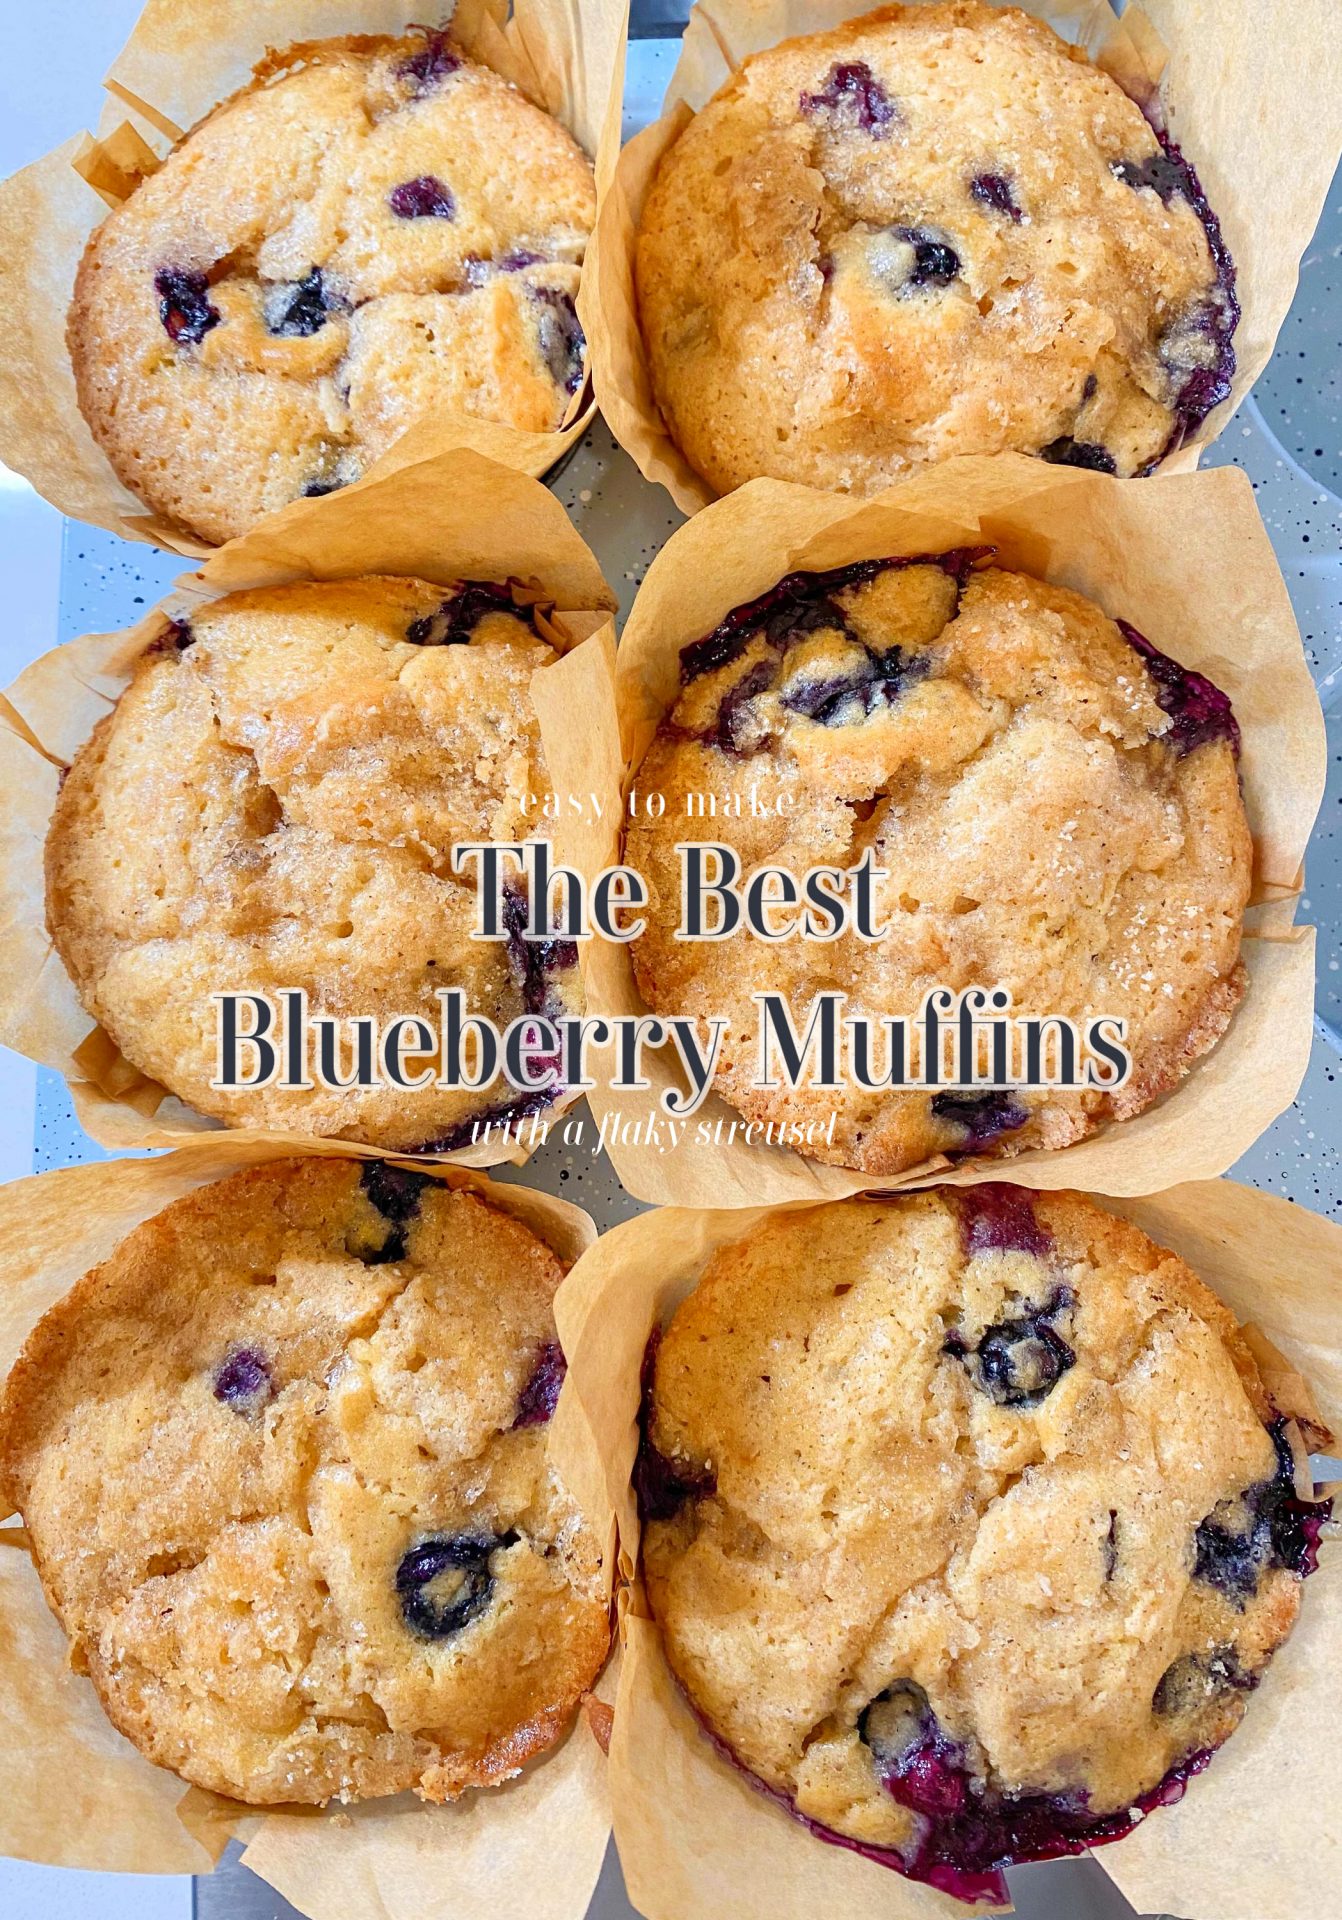 THE BEST BLUEBERRY MUFFIN RECIPE